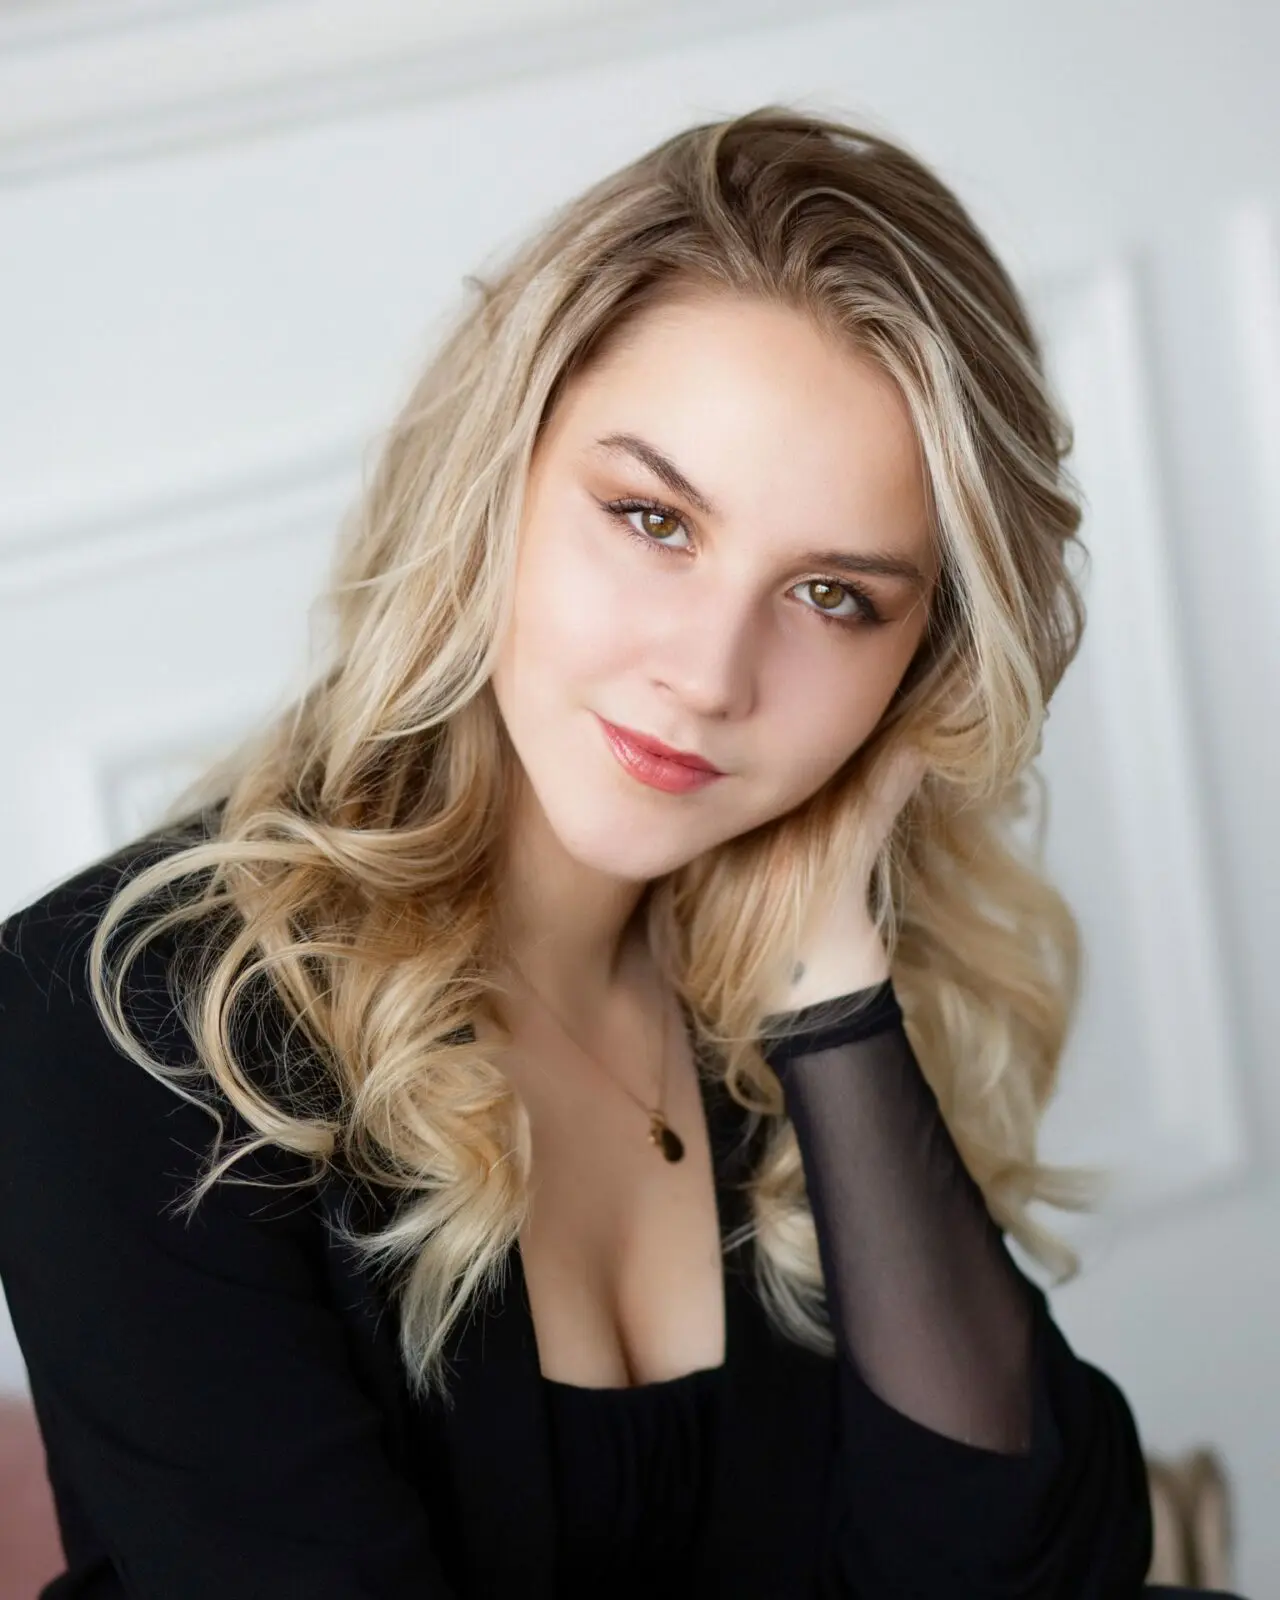 Boudoir Studio Assistant Katrina pictured, blonde girl in a black blouse against a white background